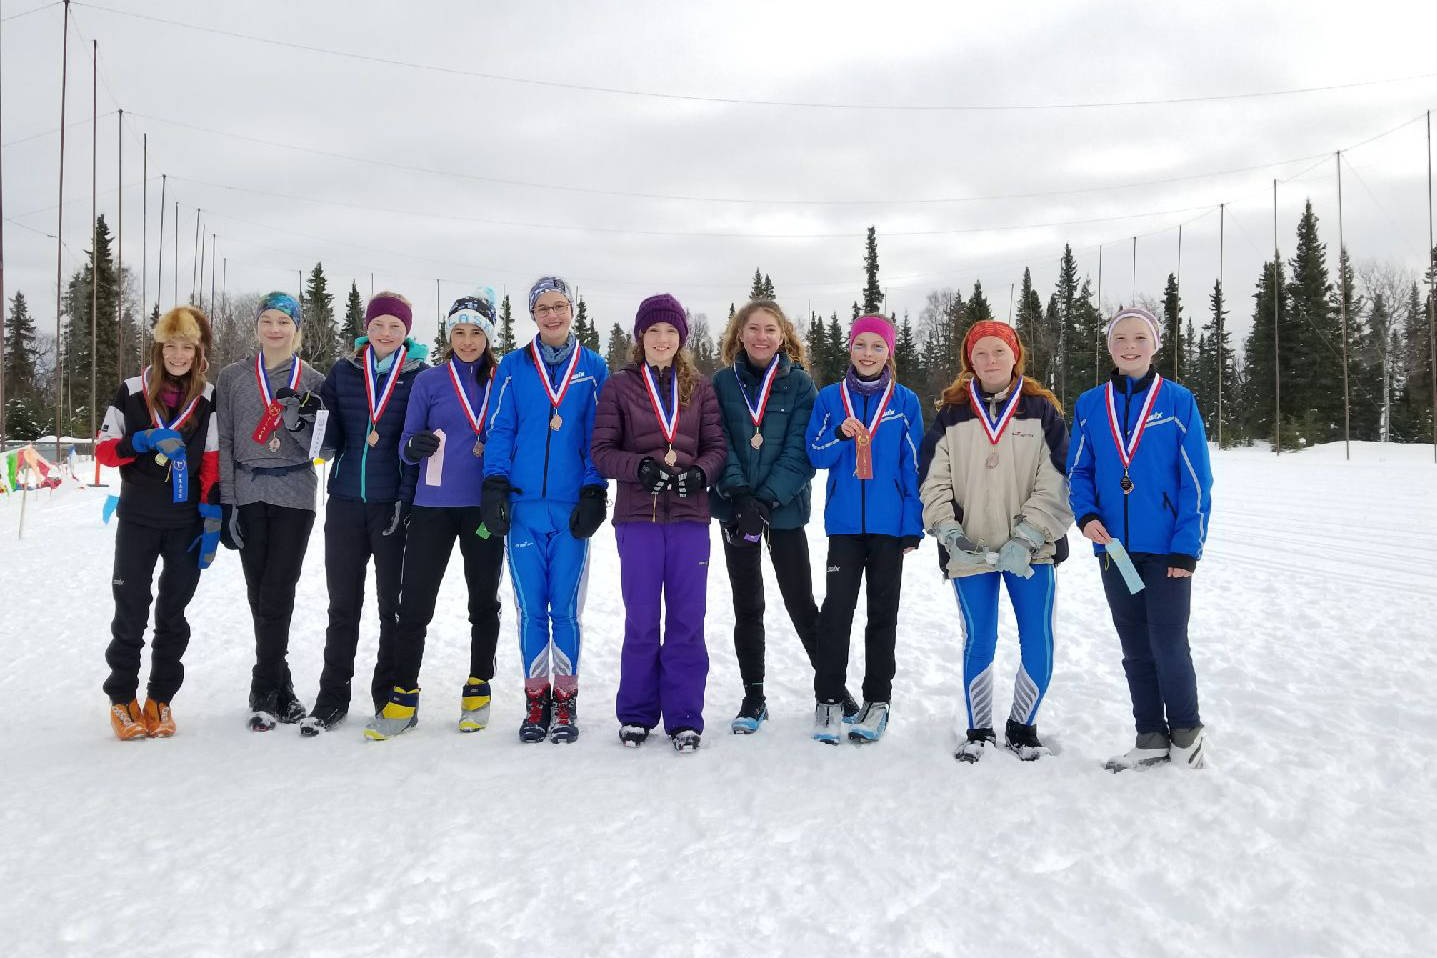 The top ten girl skiers from Homer Middle School pose for a photo at a borough-wide ski meet the weekend of March 2-3, 2019 in Kenai, Alaska. (Photo submitted)